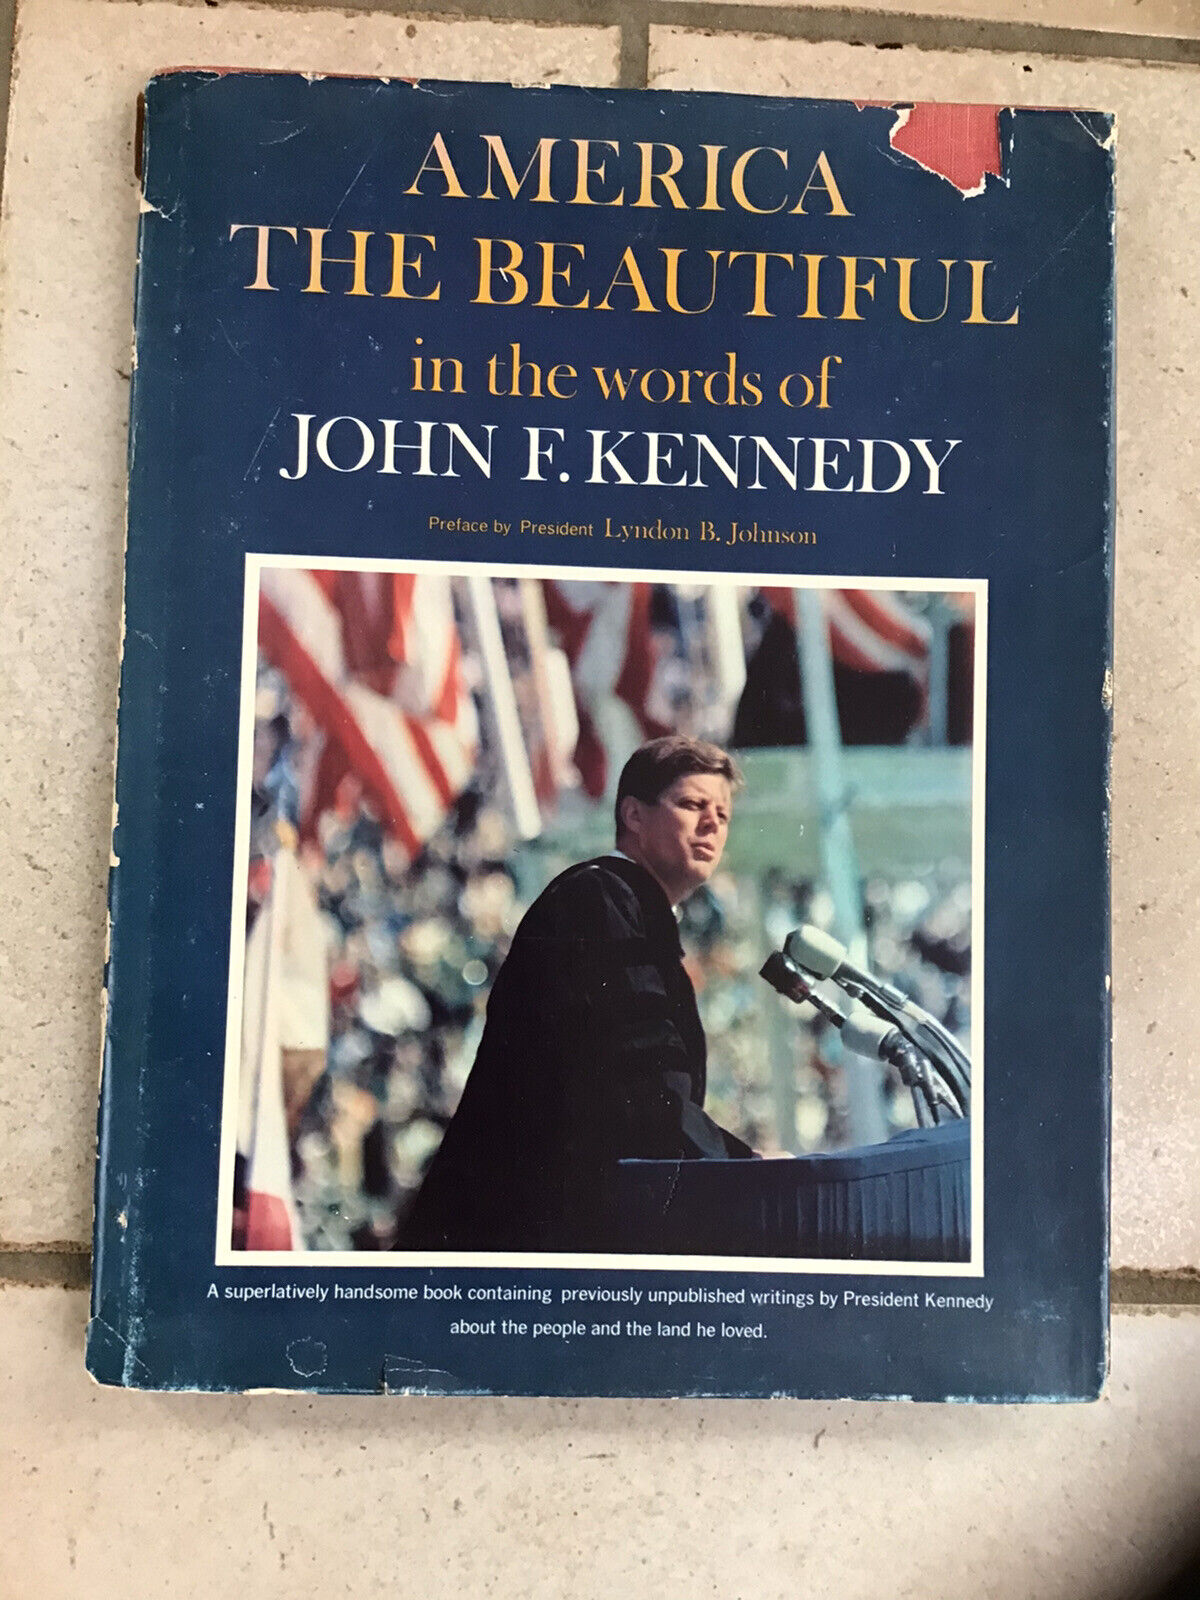 J..F.K. “America the Beautiful In the Words of John F Kennedy” 1964 Hardcover